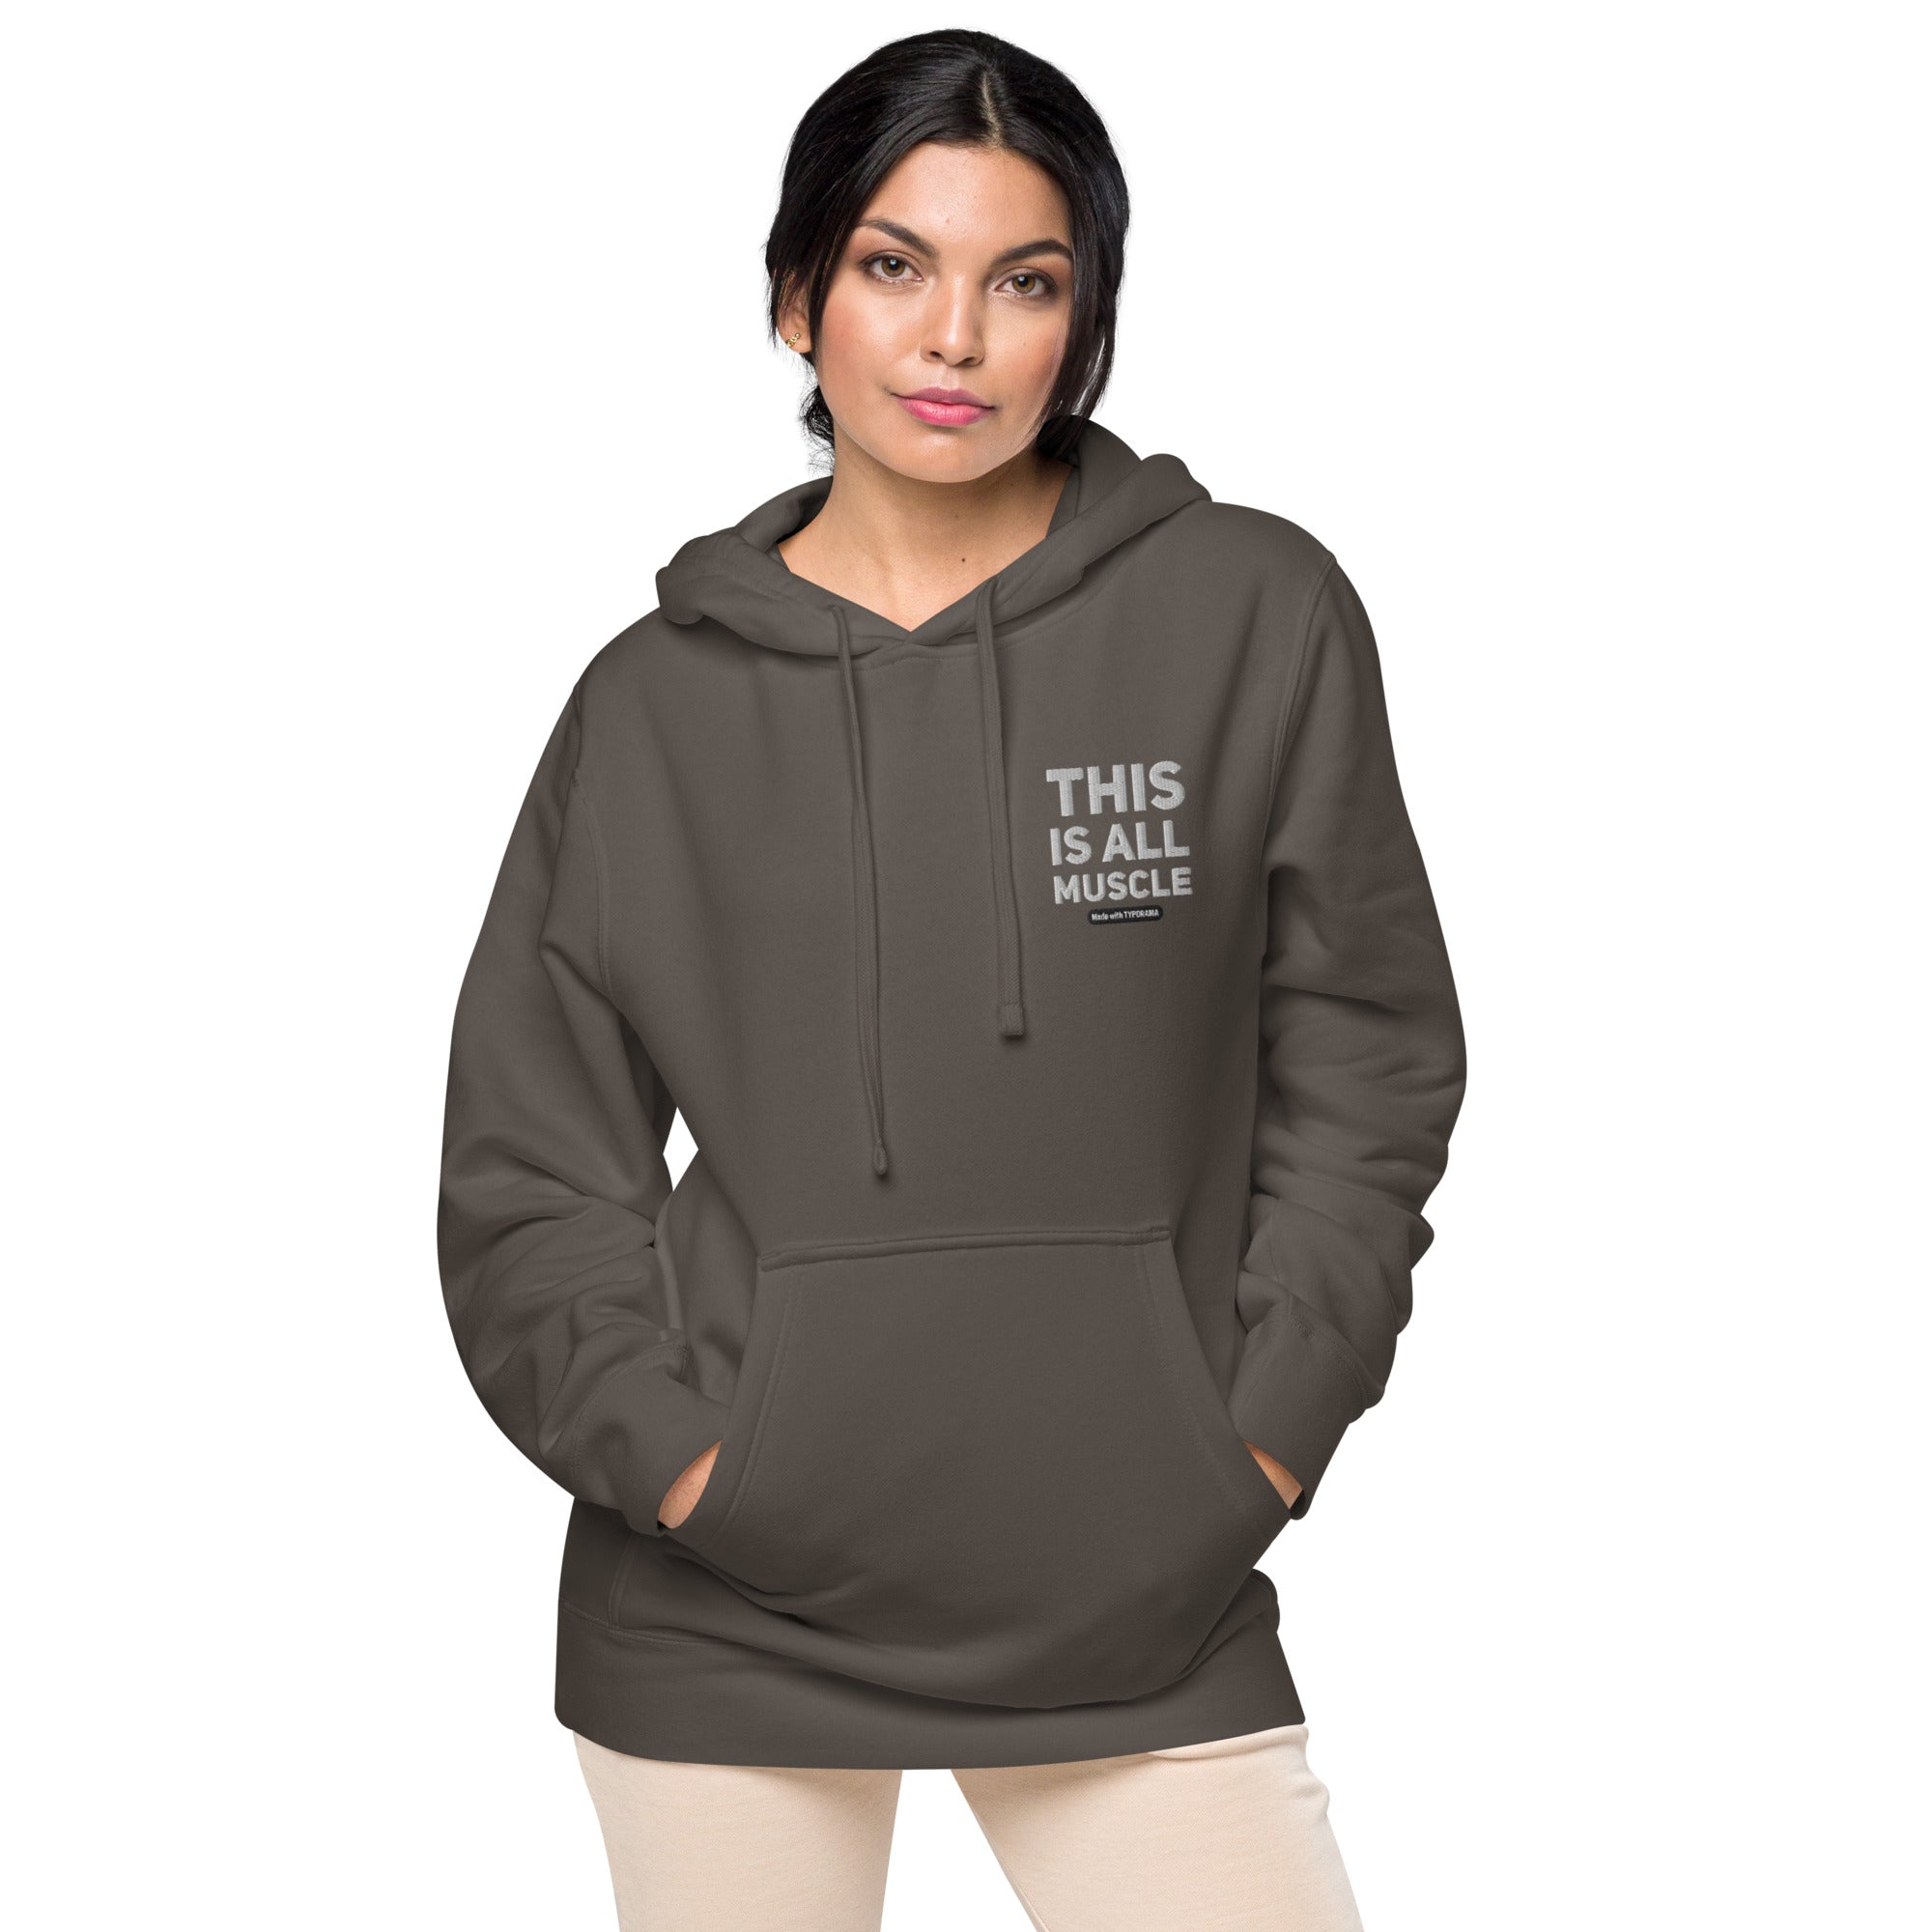 THIS IS ALL MUSCLE Unisex pigment-dyed hoodie